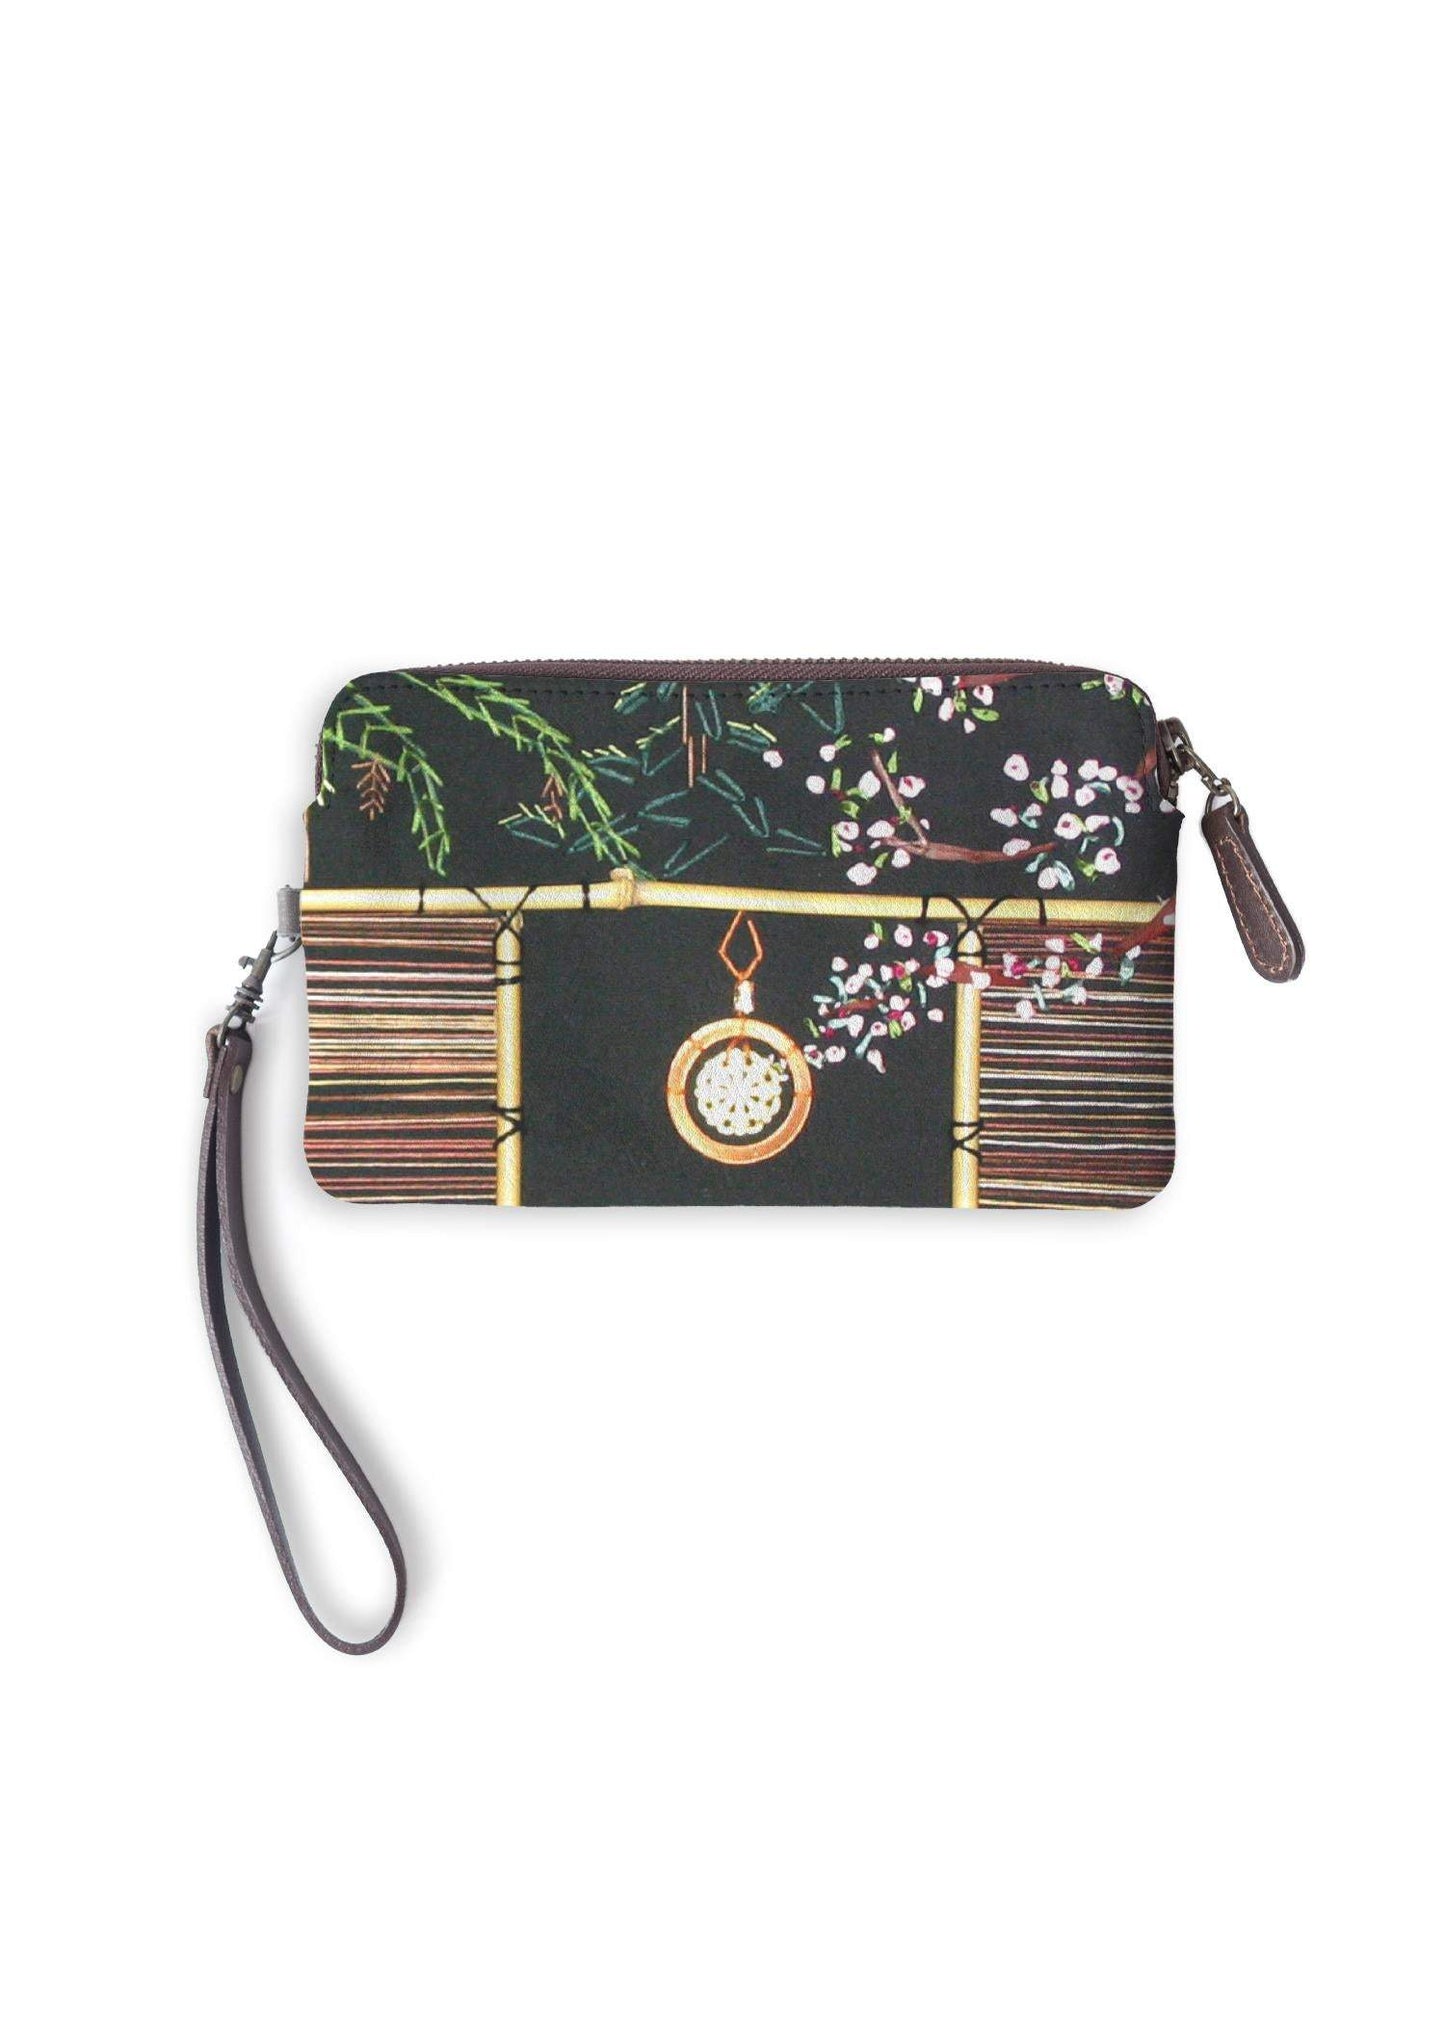 Cherry Blossoms and Jade Leather Clutch - Only 10 of 20 Remain